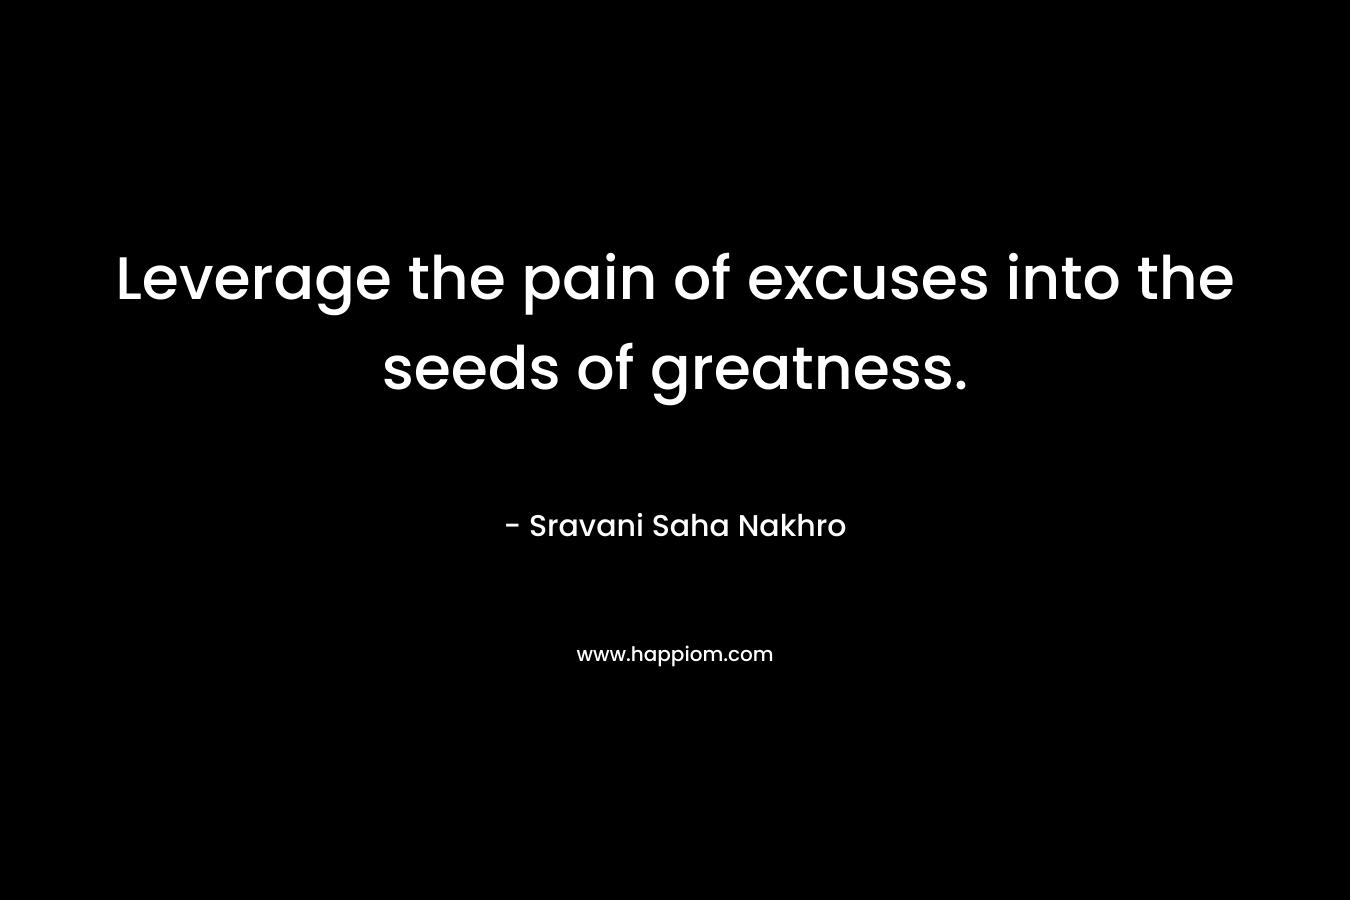 Leverage the pain of excuses into the seeds of greatness. – Sravani Saha Nakhro